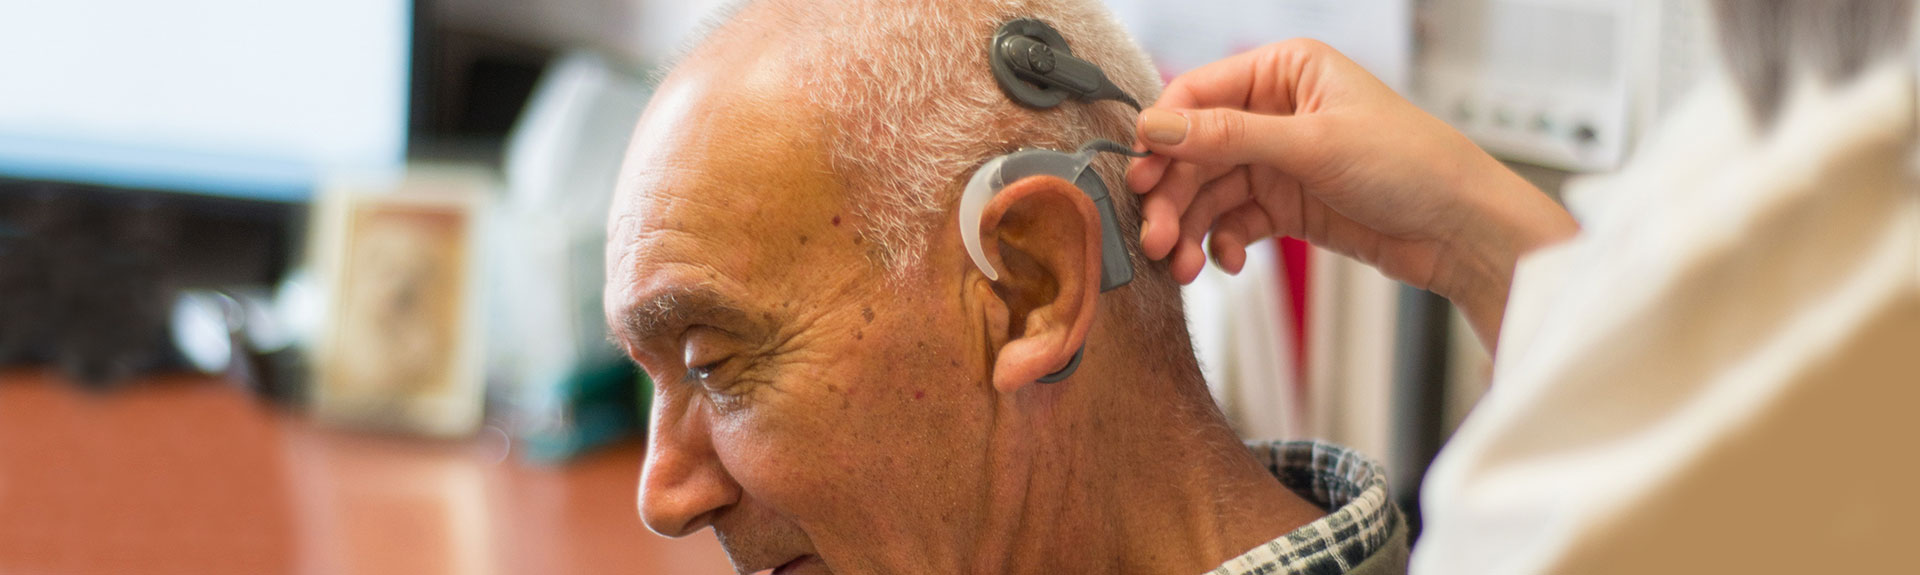 Image of male with Hearing aid device